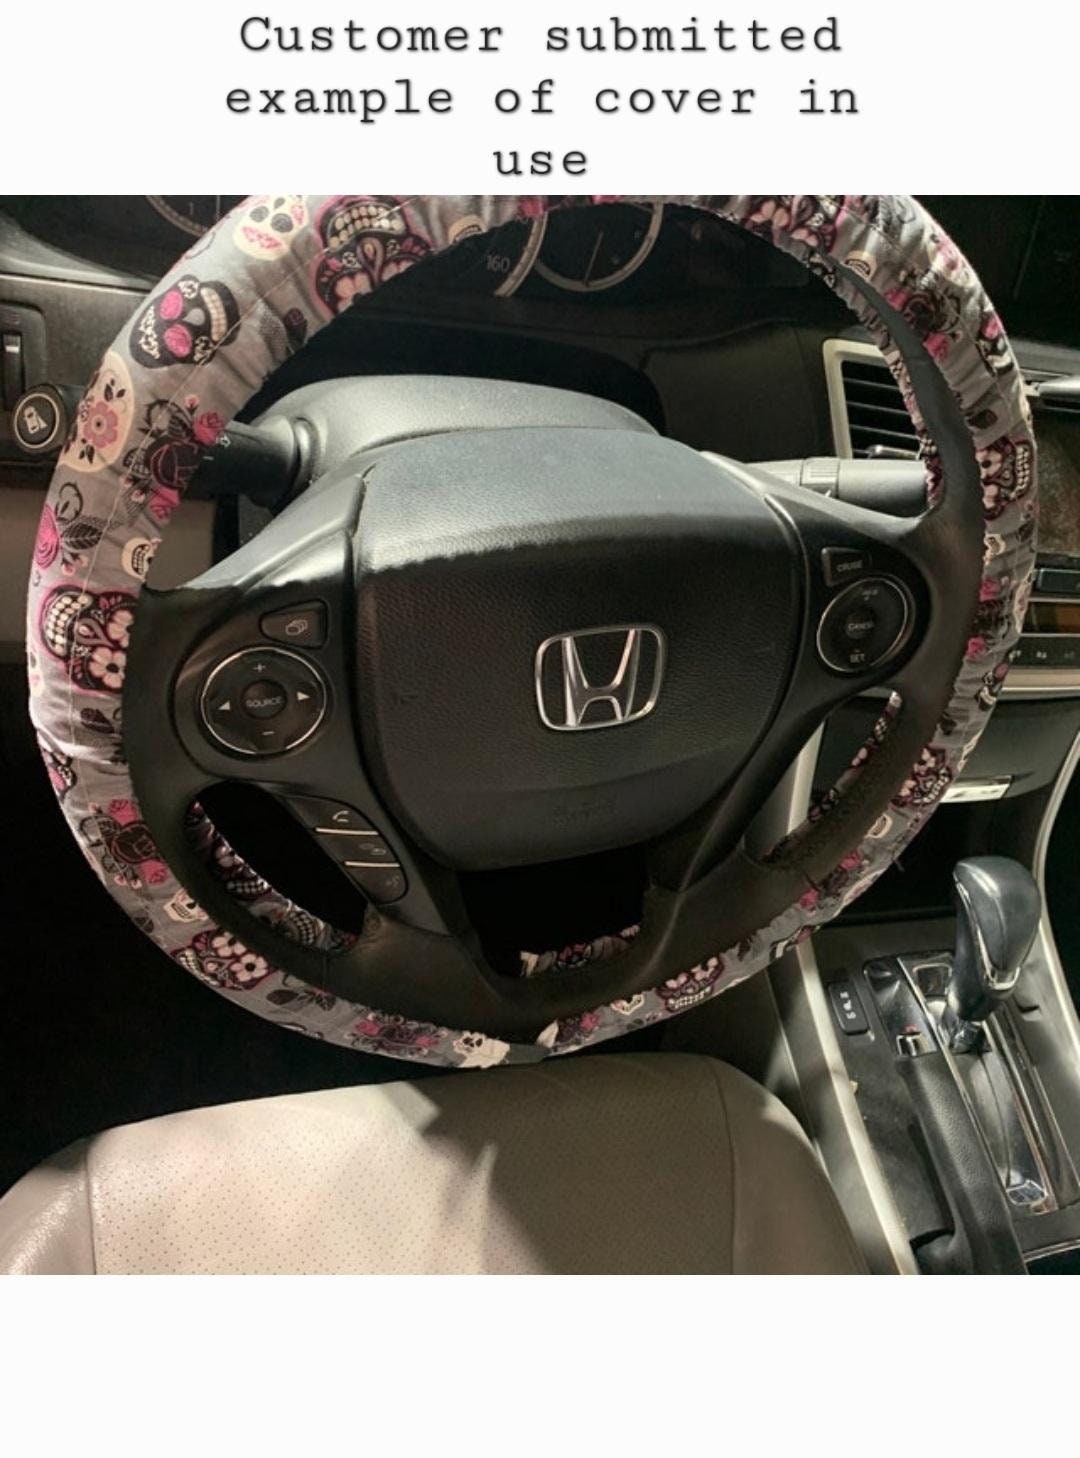 Cherry Pinwheel Steering Wheel Cover, 100% Cotton, Washable, Custom Car Accessories - Harlow's Store and Garden Gifts